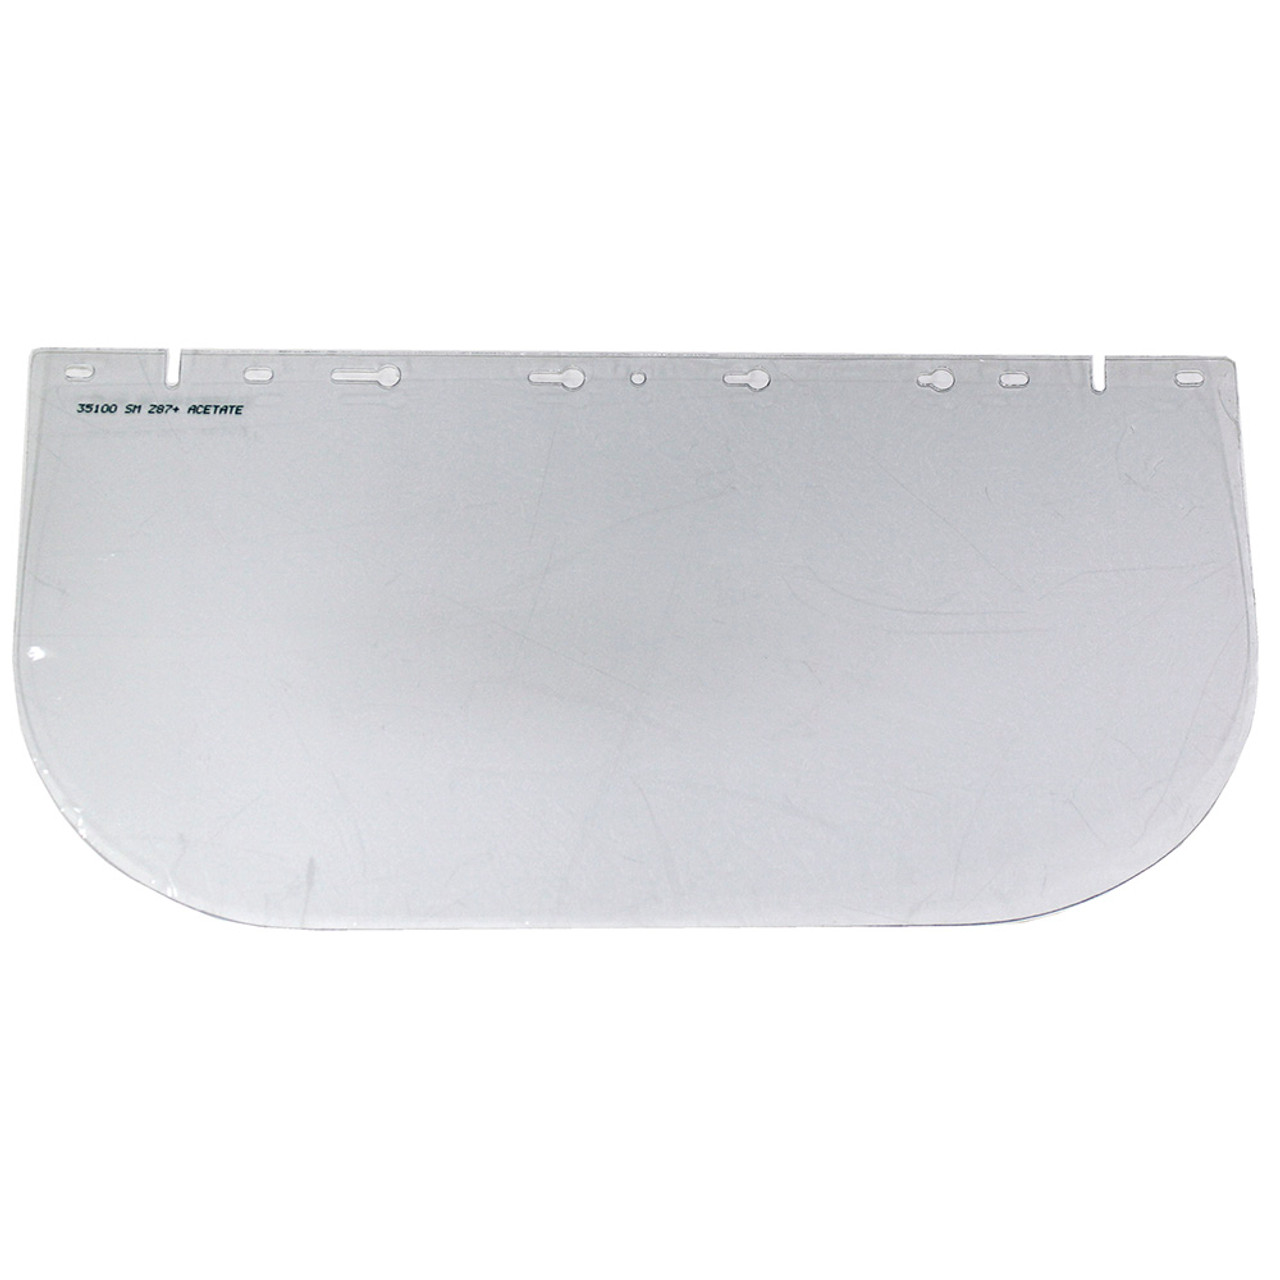 Replacement 390 Series 8 x 16" Clear Acetate Face Shield  S35100